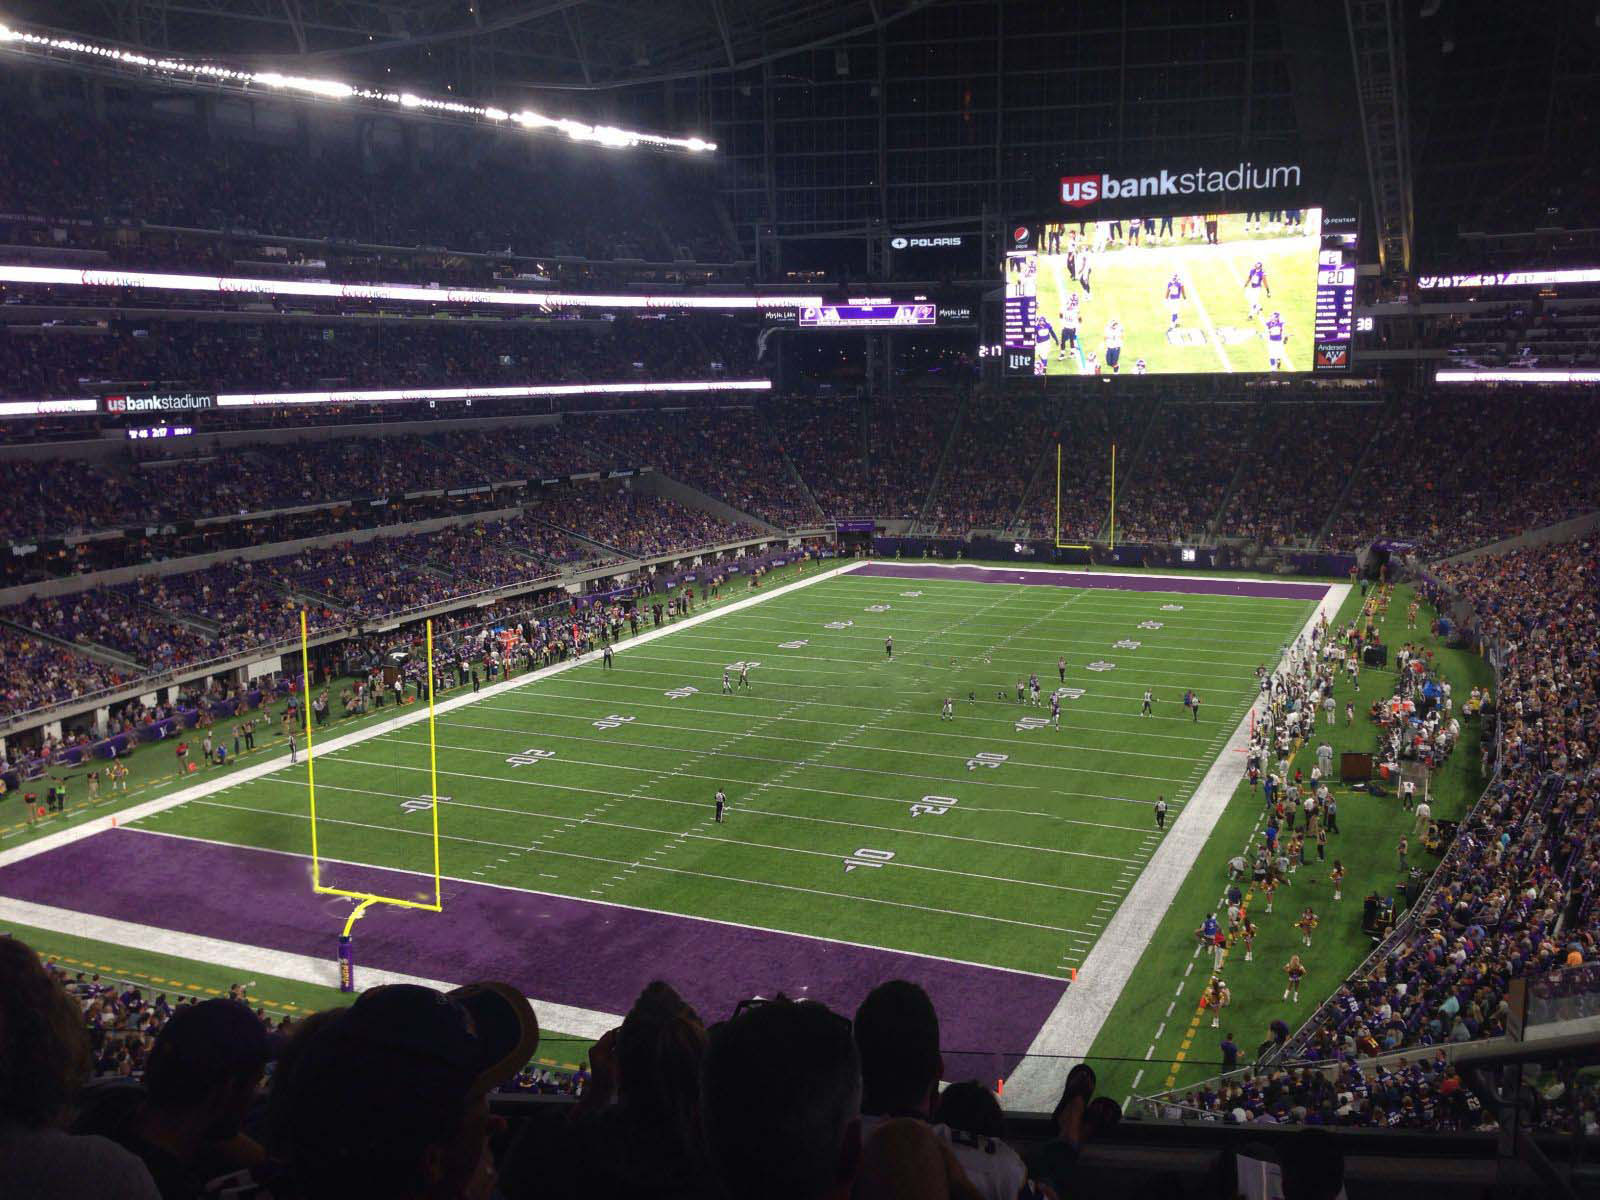 section 221, row 6 seat view  for football - u.s. bank stadium